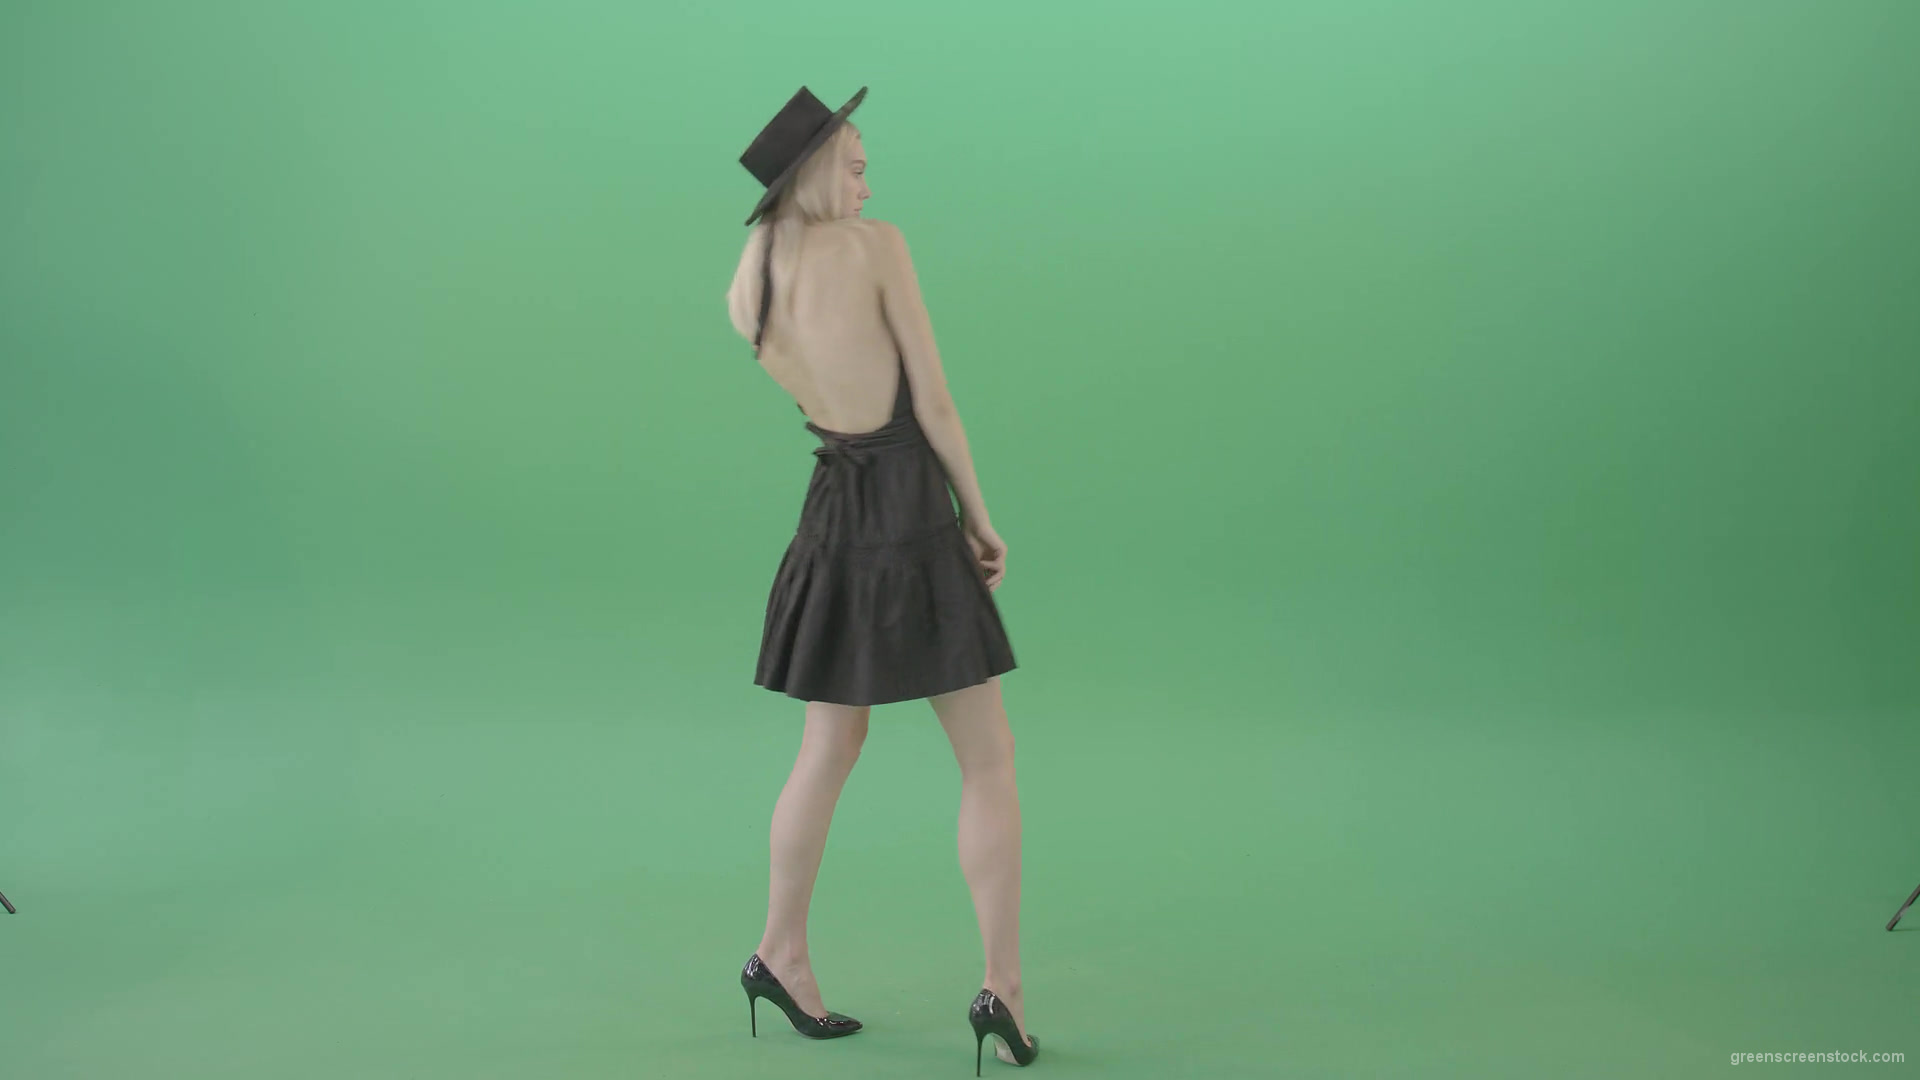 Sexy-blonde-girl-dancing-in-black-fashion-wear-dress-isolated-on-chromakey-Green-Screen-Video-Footage-1920_005 Green Screen Stock